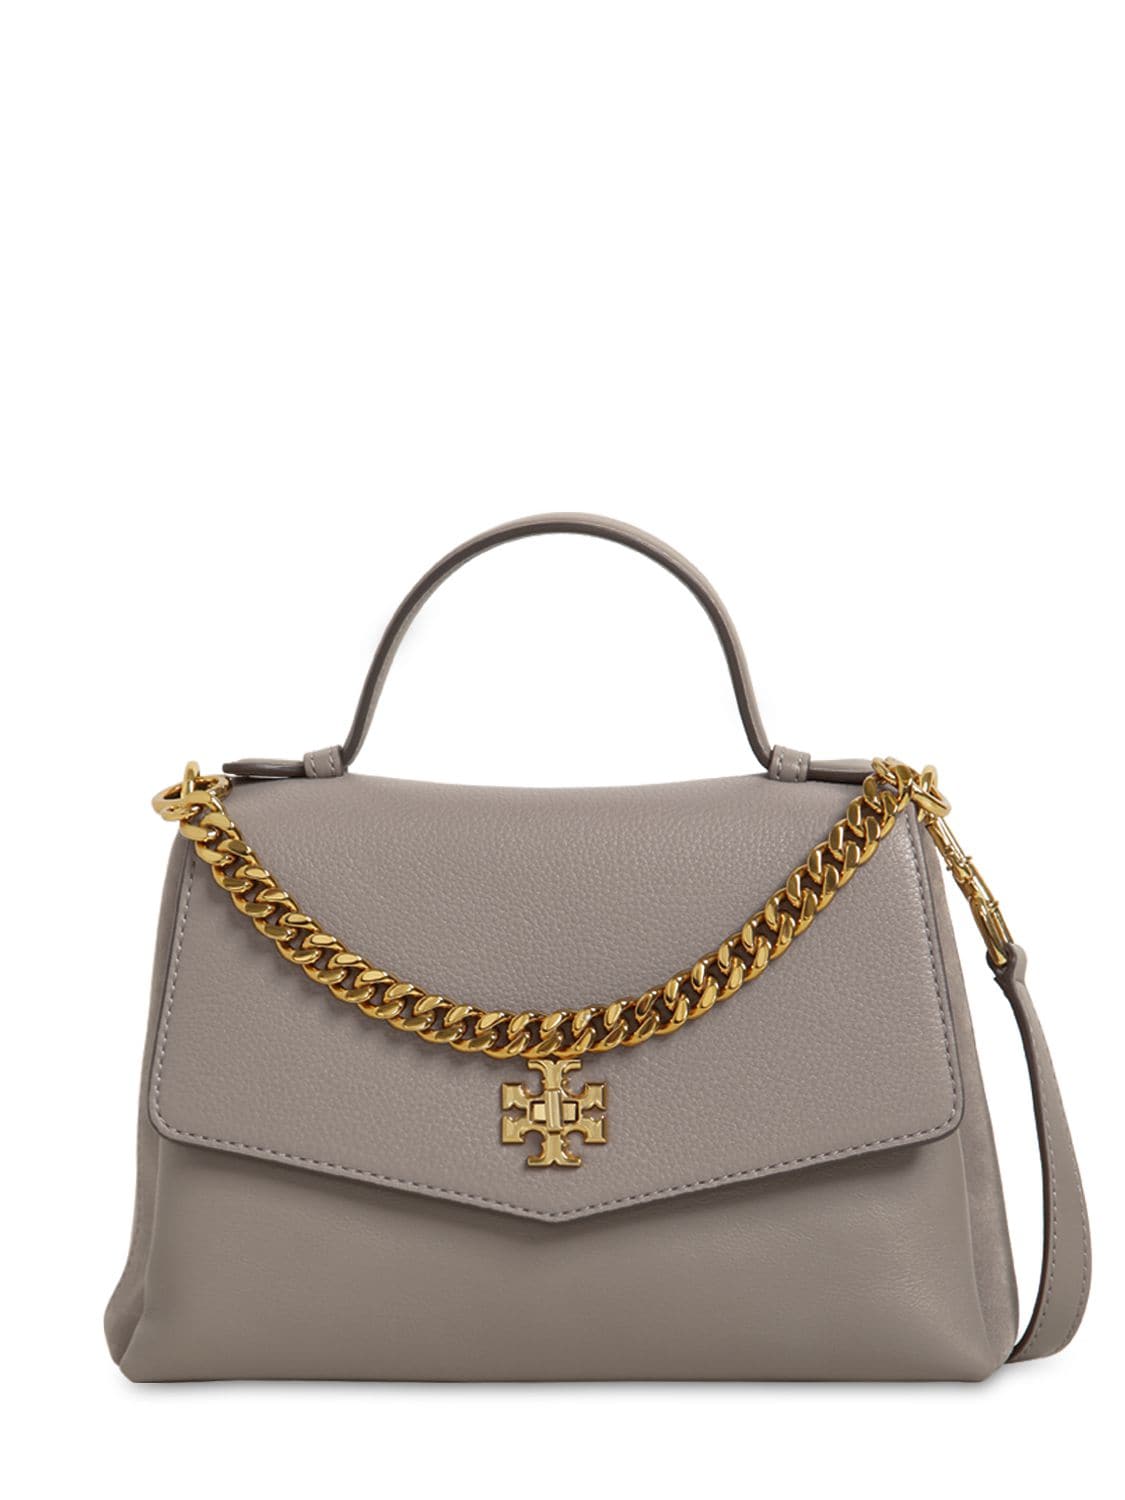 Tory Burch Kira Grained & Smooth Leather Bag In Grey